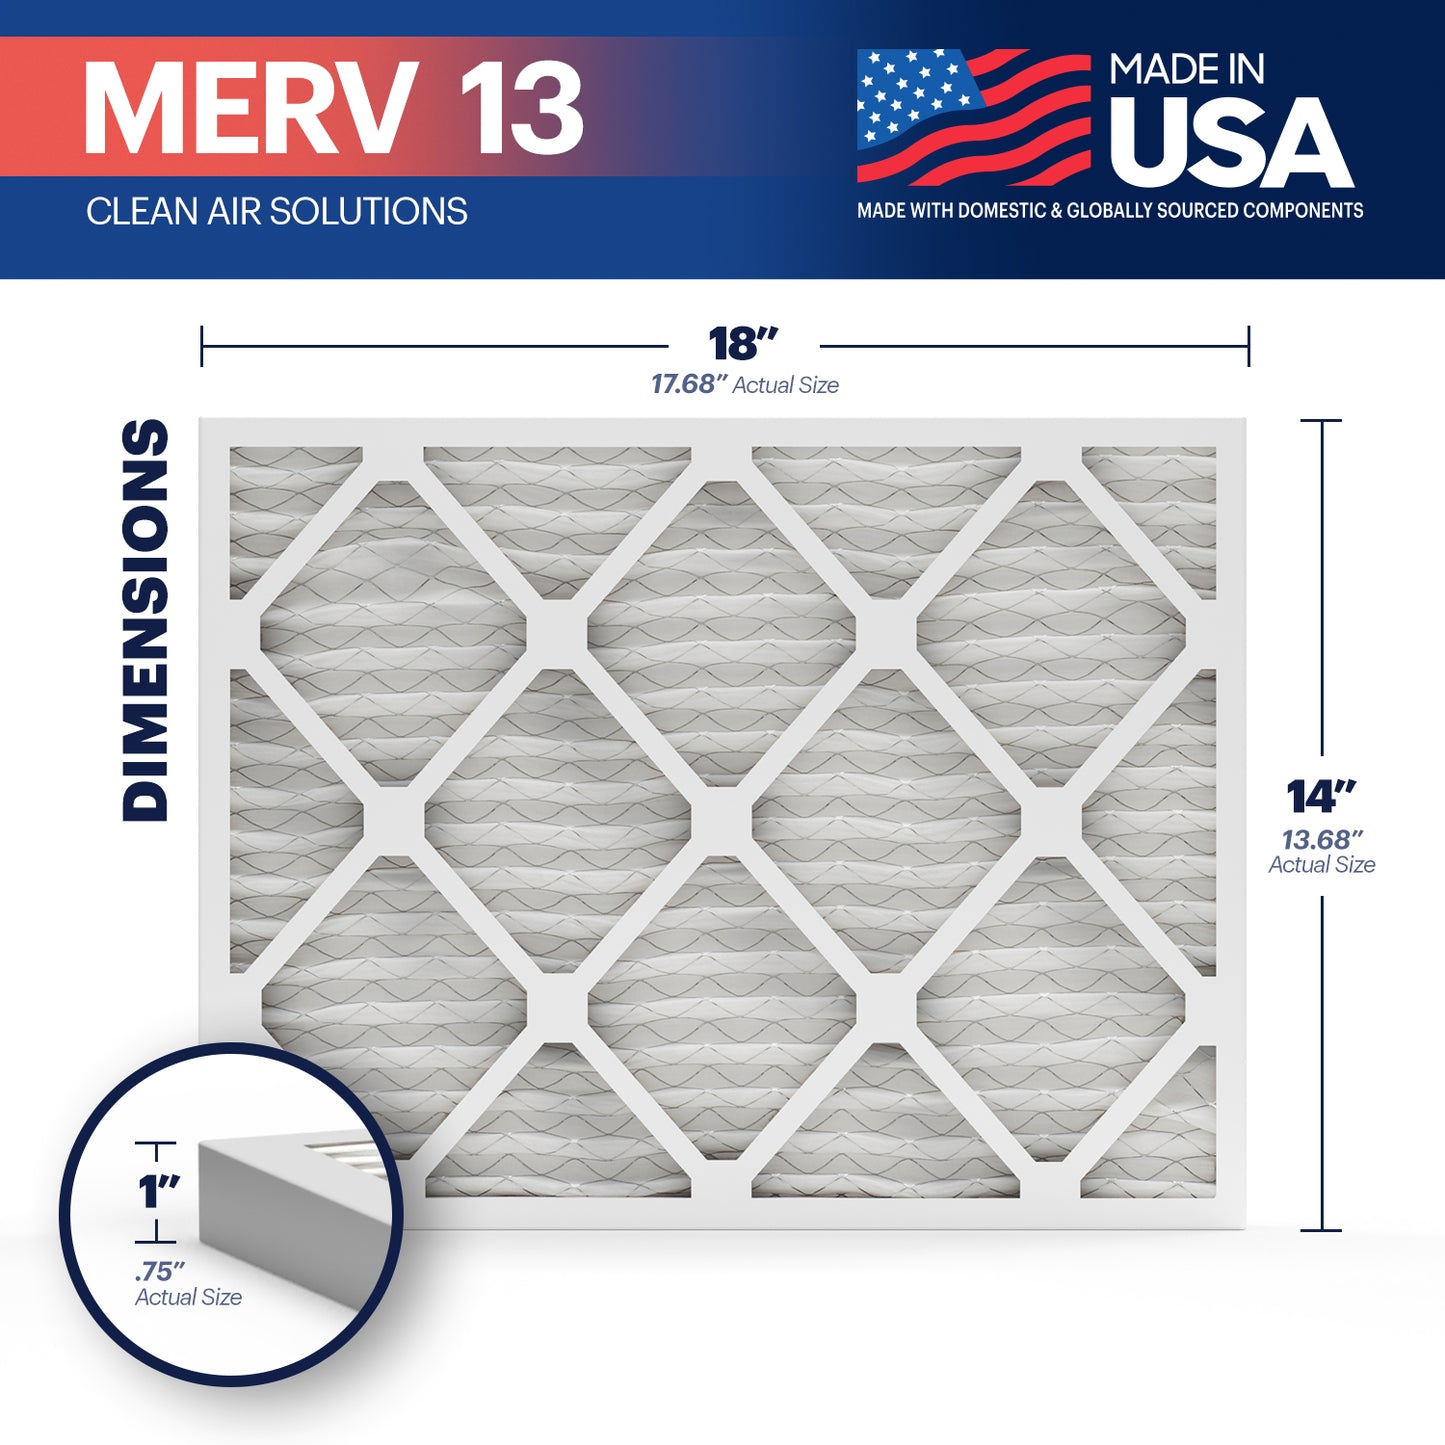 BNX TruFilter 14x18x1 MERV 13 Pleated Air Filter – Made in USA (4-Pack)